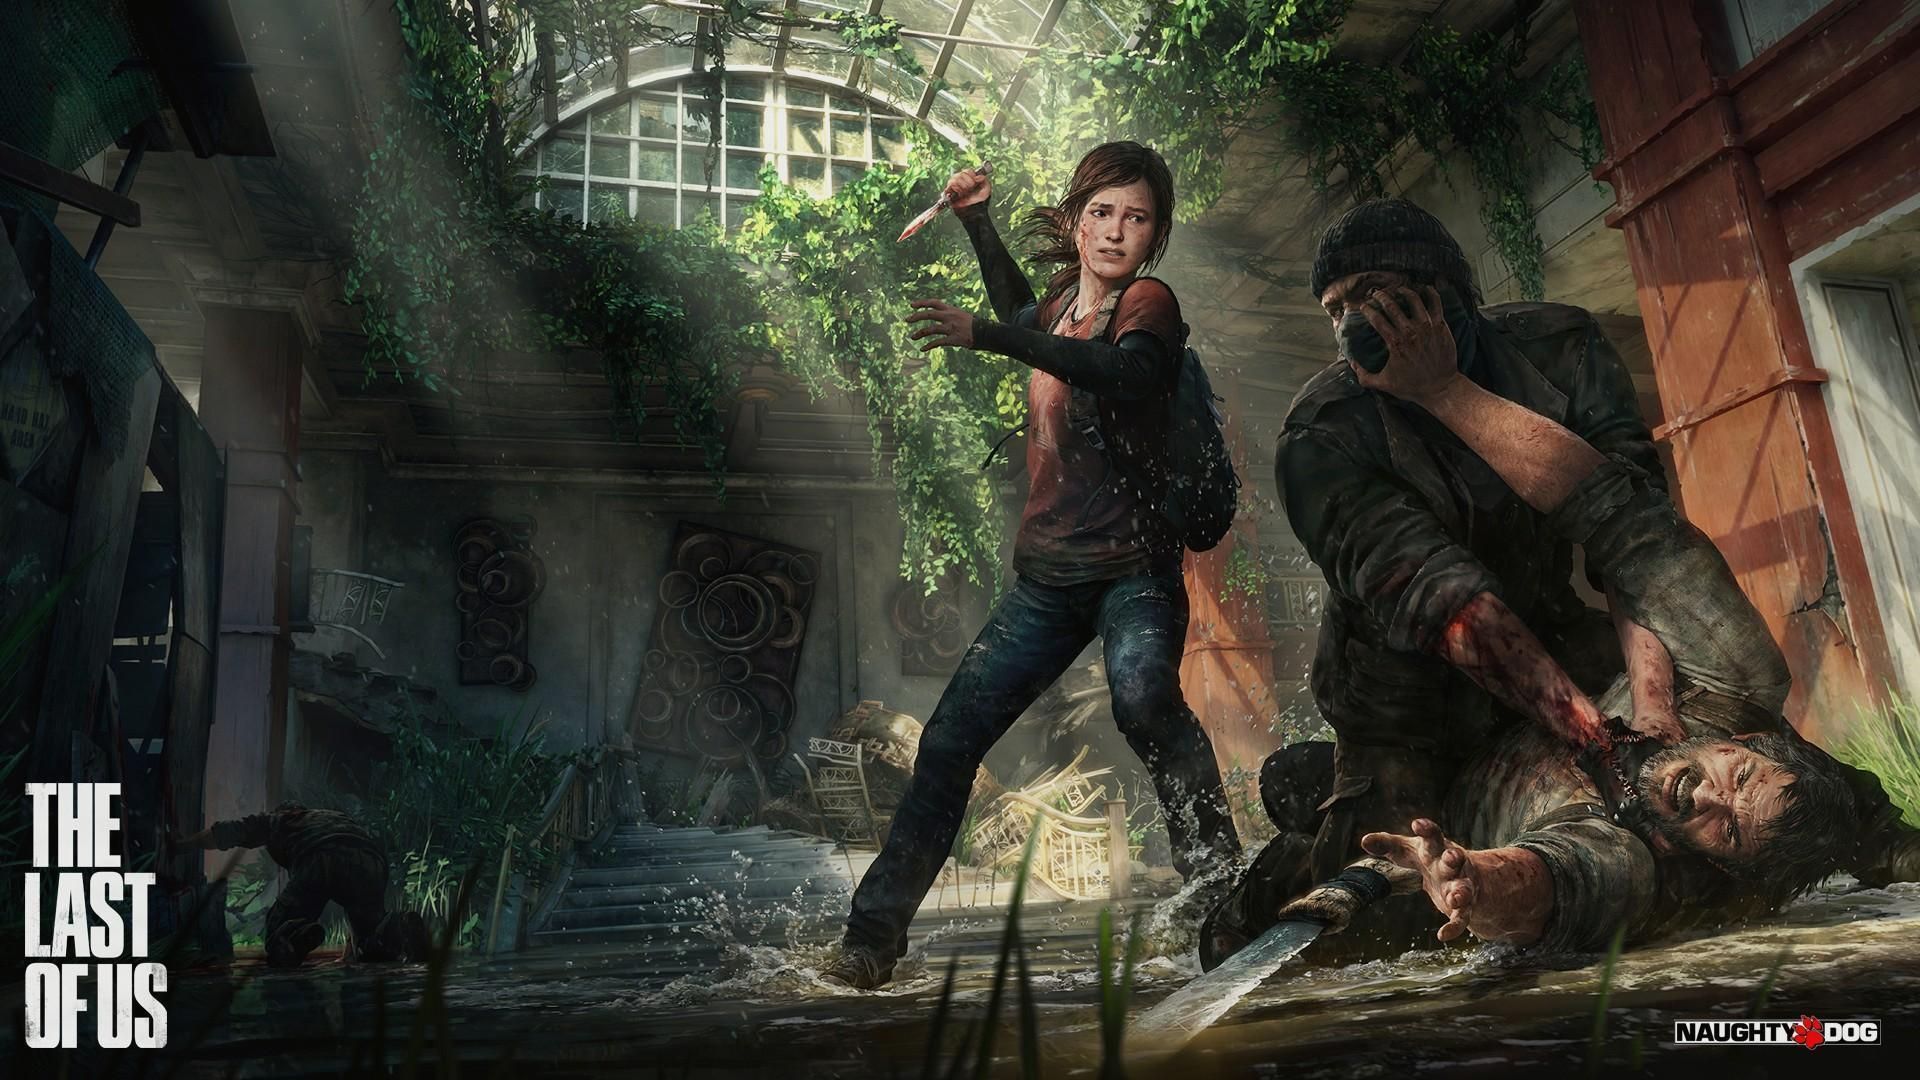 The Last of Us Wallpapers - Top The Last of Us Backgrounds